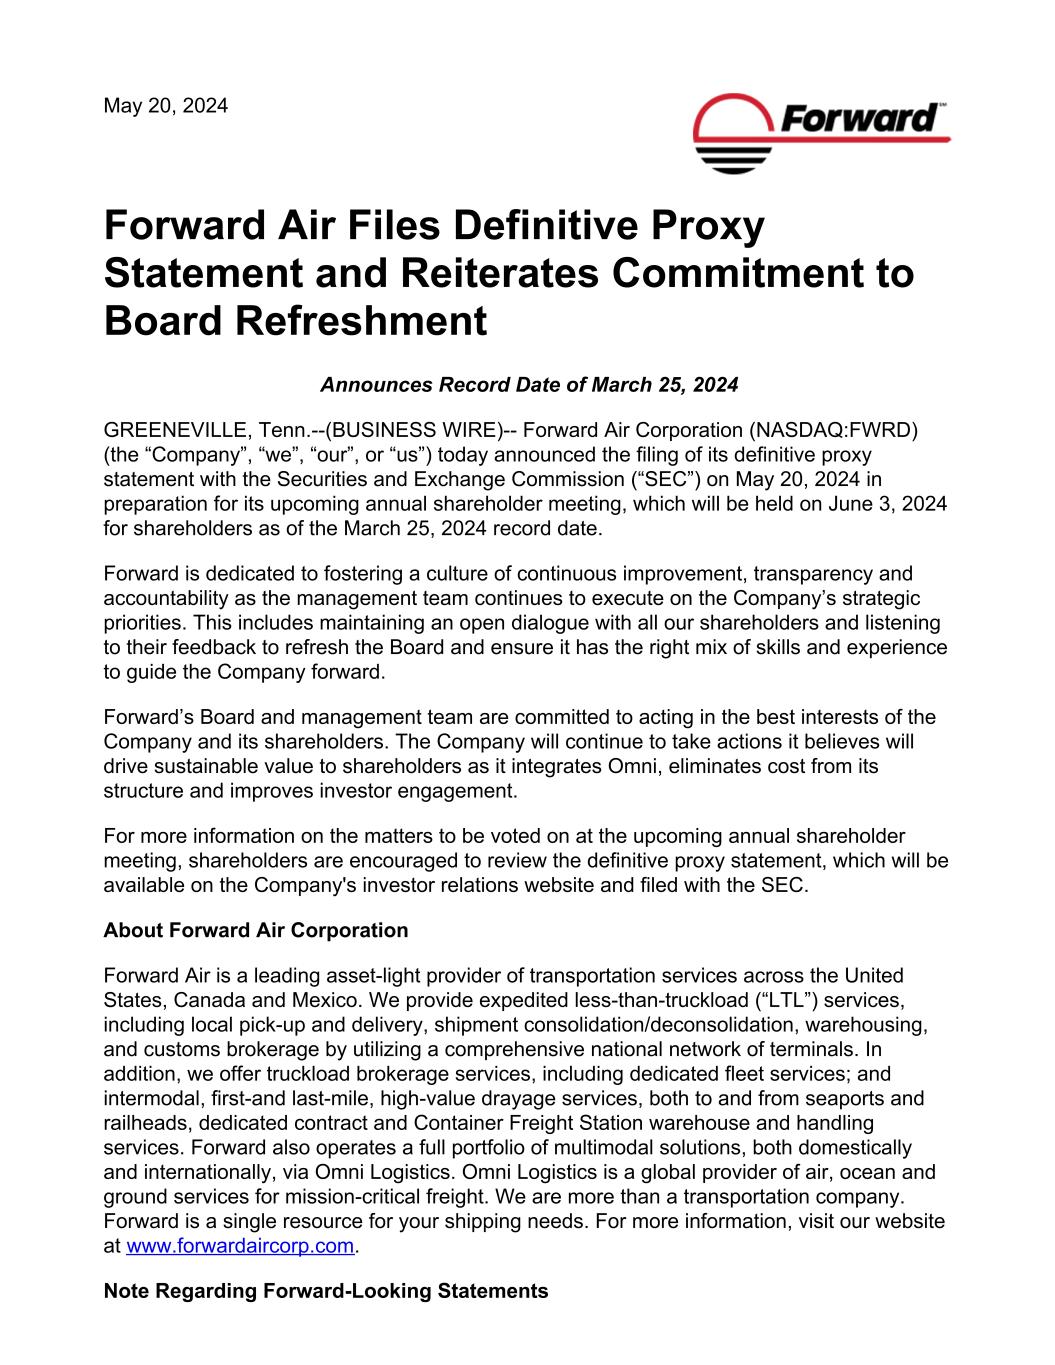 Forward Air Files Definitive Proxy Statement and Reiterates Commitment to Board Refreshment001.jpg